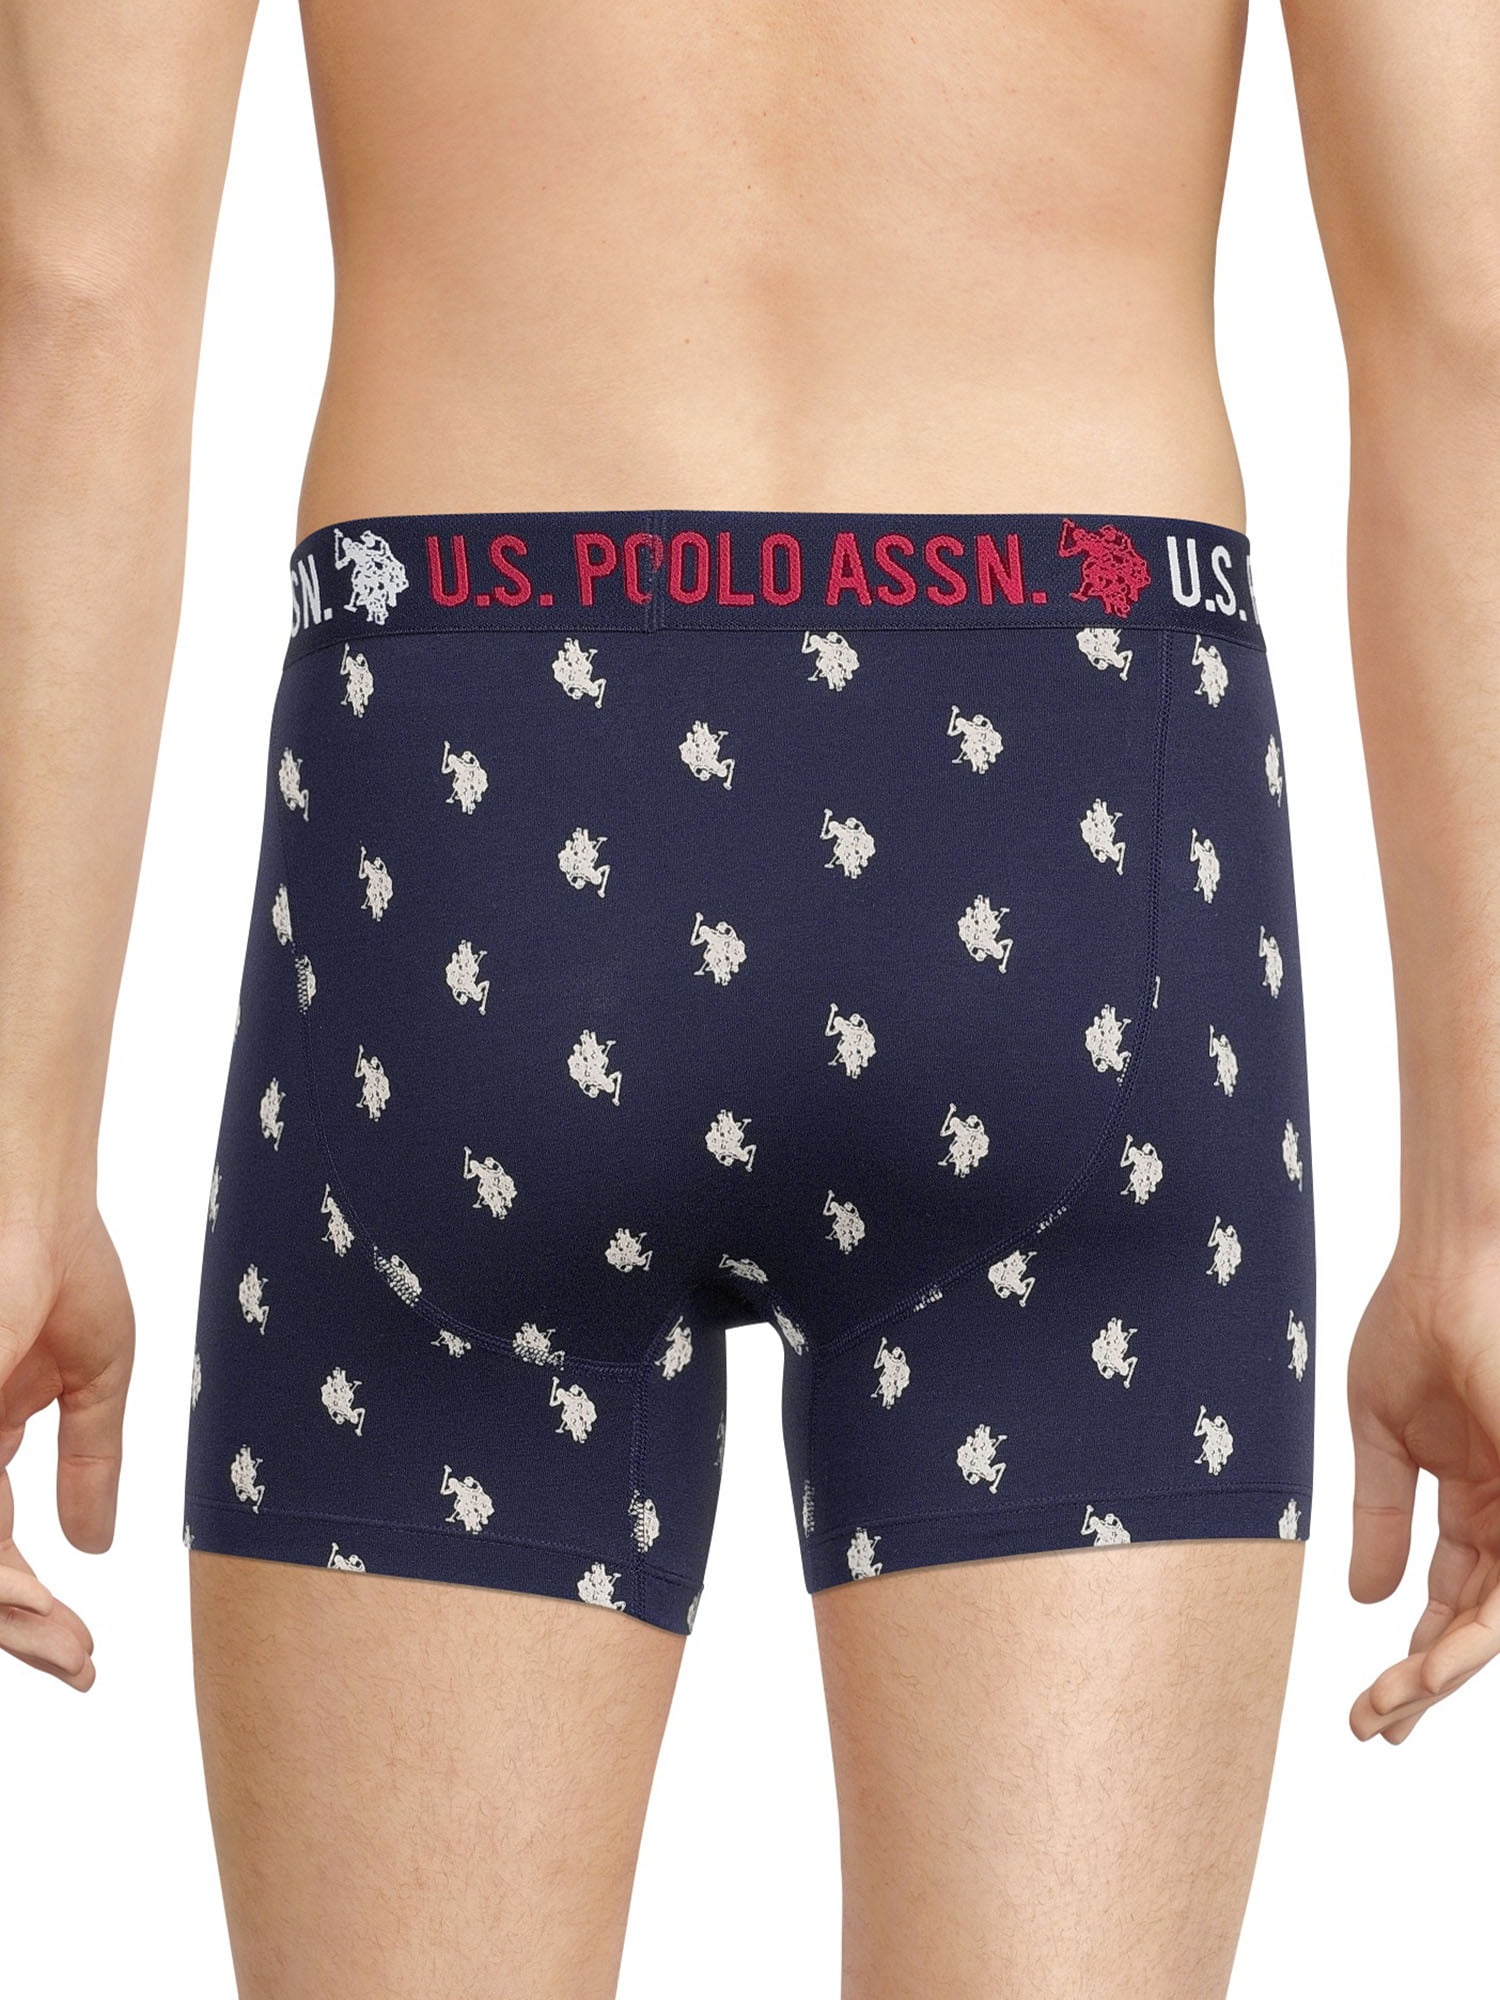 U.S. Polo Assn. Men's 3-Pack Cotton Boxer Briefs, Heather Grey/Black, Small  at  Men's Clothing store